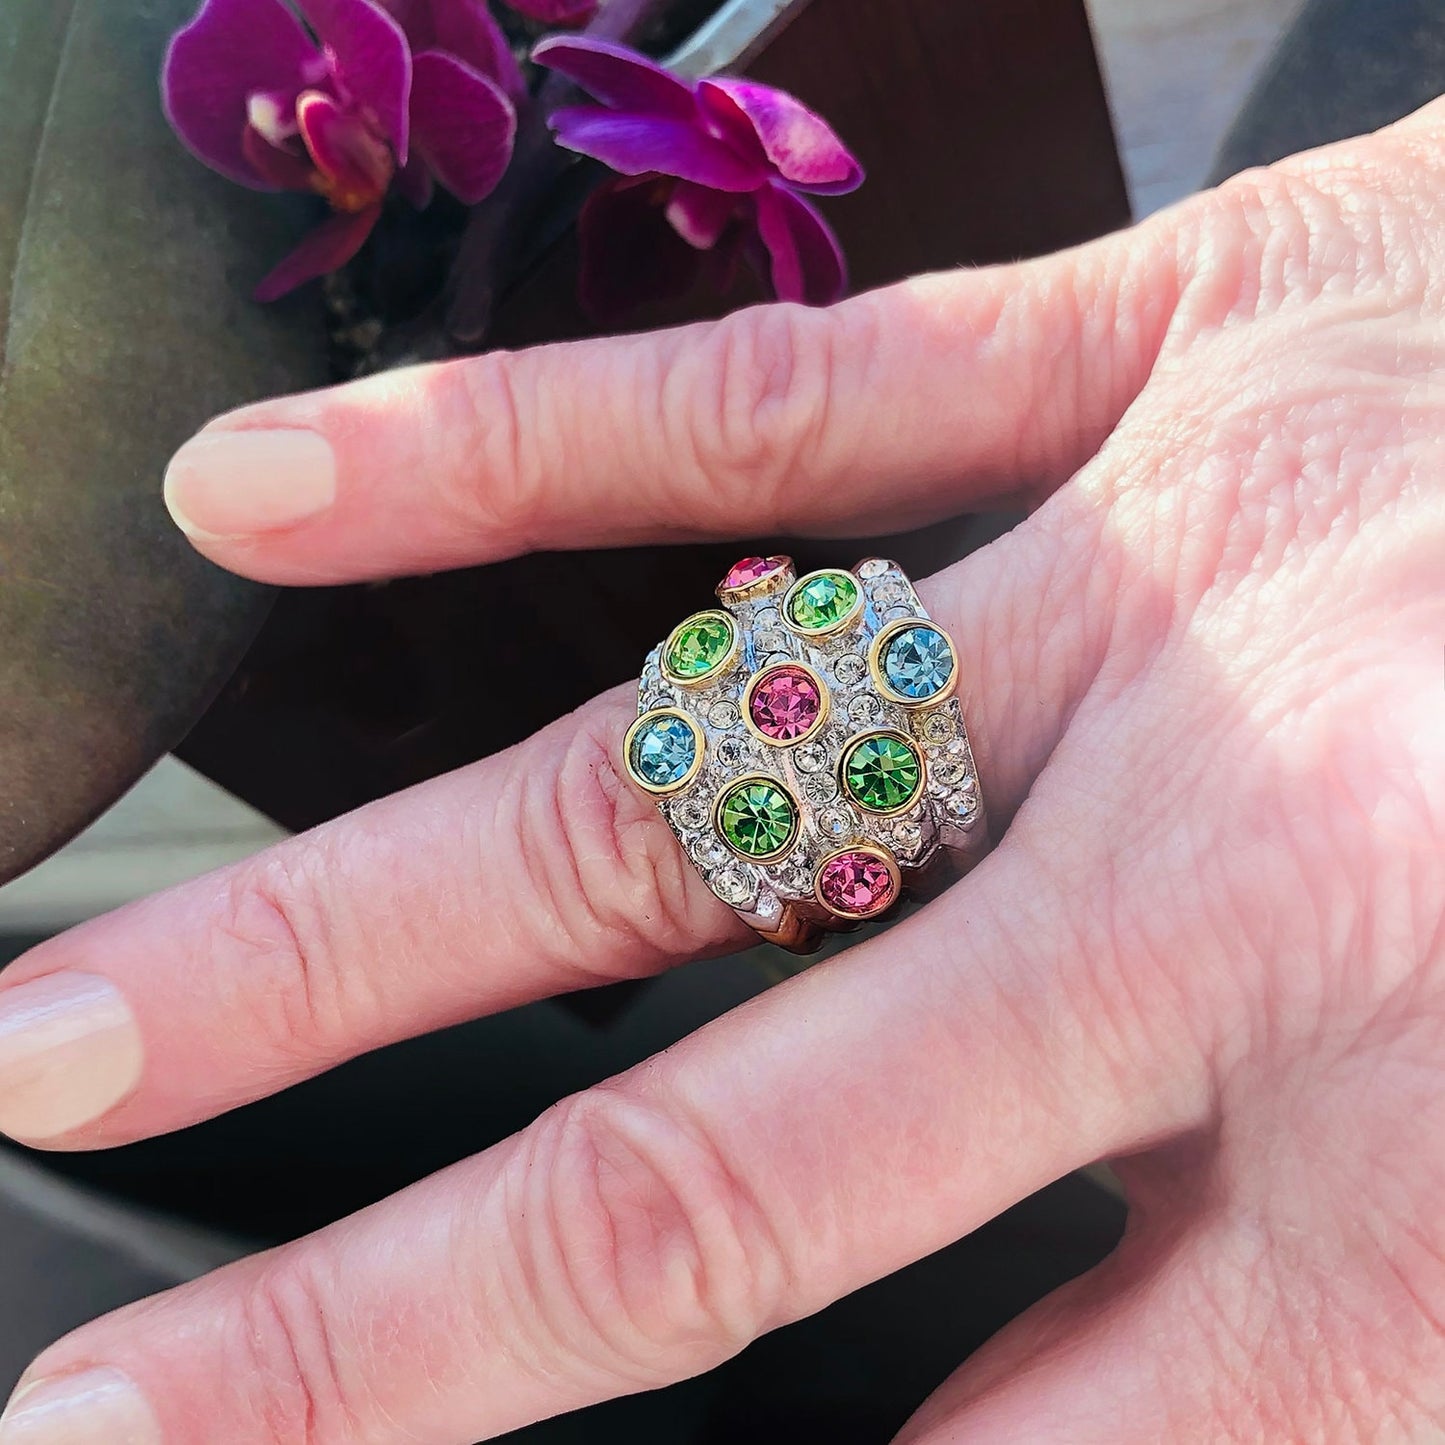 Vintage Ring Pave Pastel Multi Color Crystals Clear Swarovski Crystal Ring 18k Gold Antique Womans Jewelry - Limited Stock - Never Worn